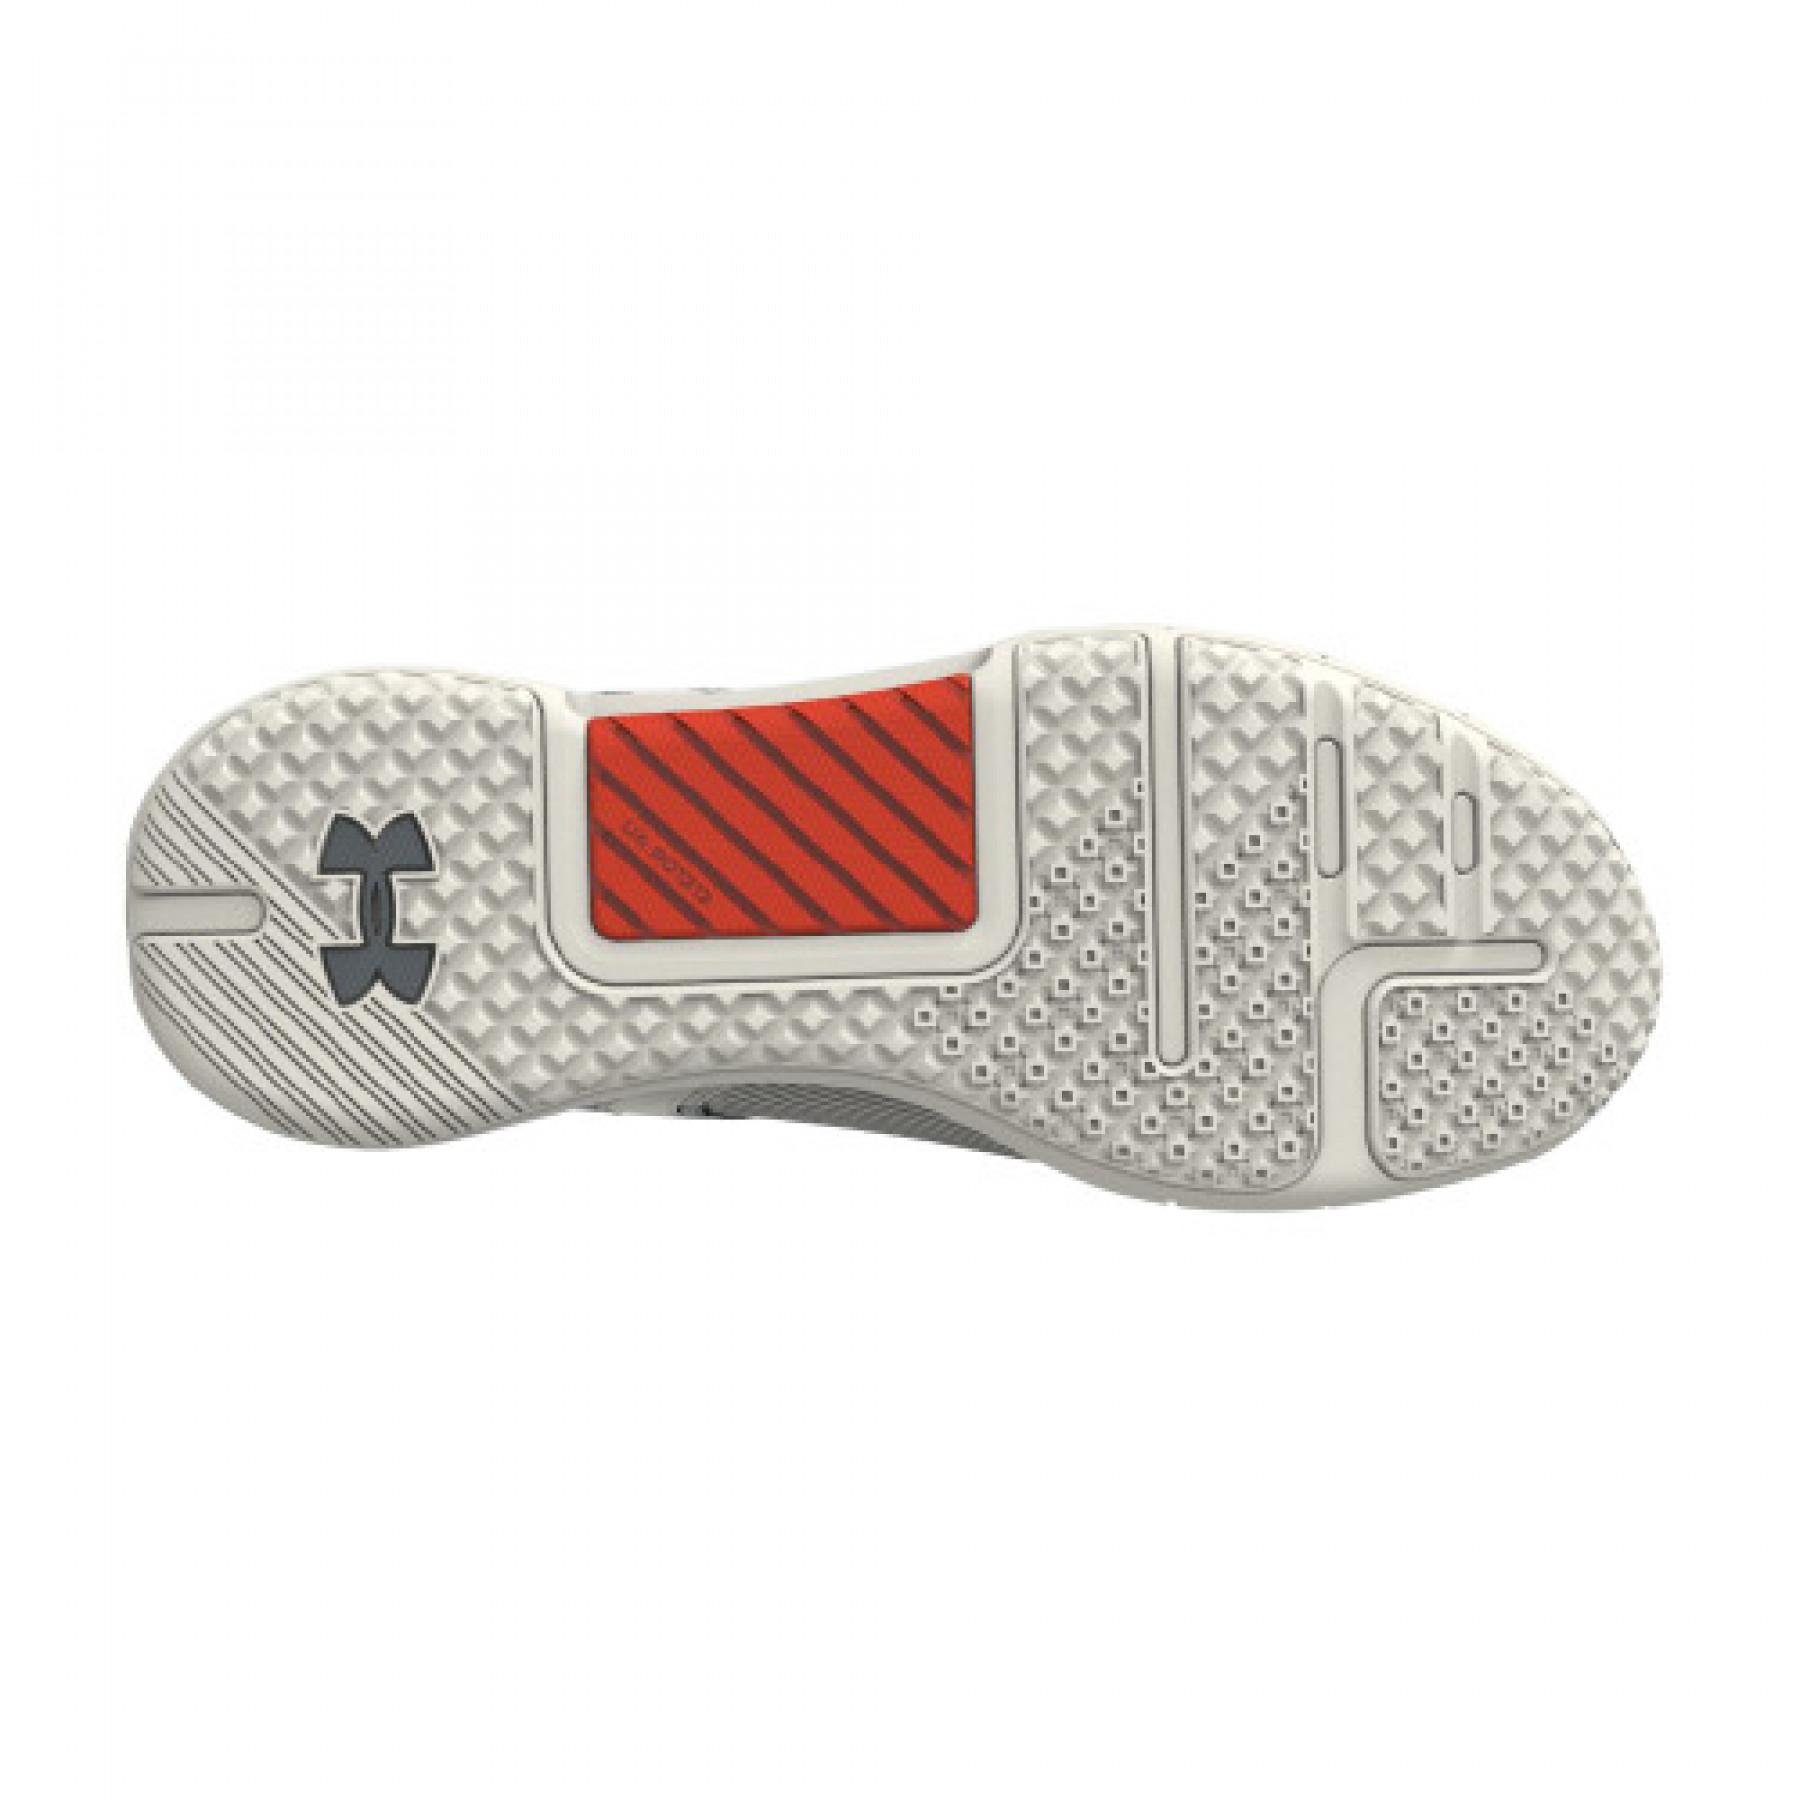 Shoes Under Armour HOVR™ Rise 2